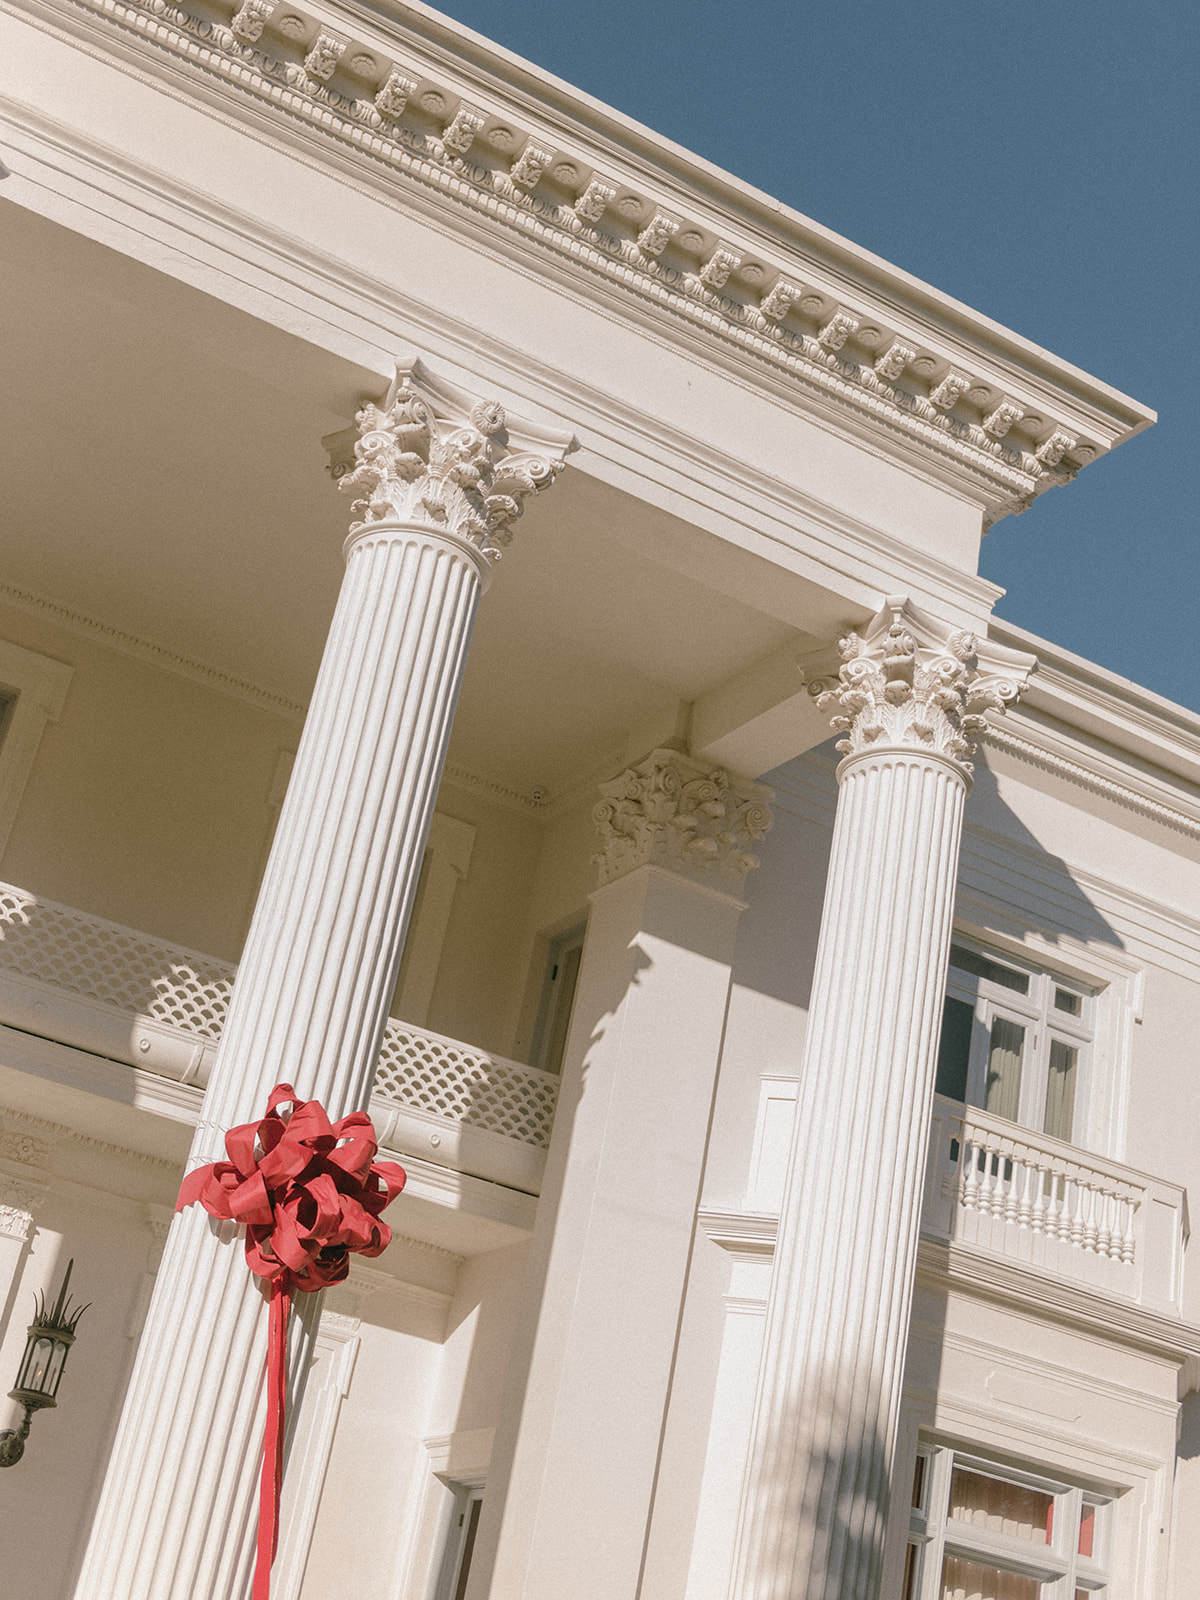 Big red bows flank the columns of the estately home